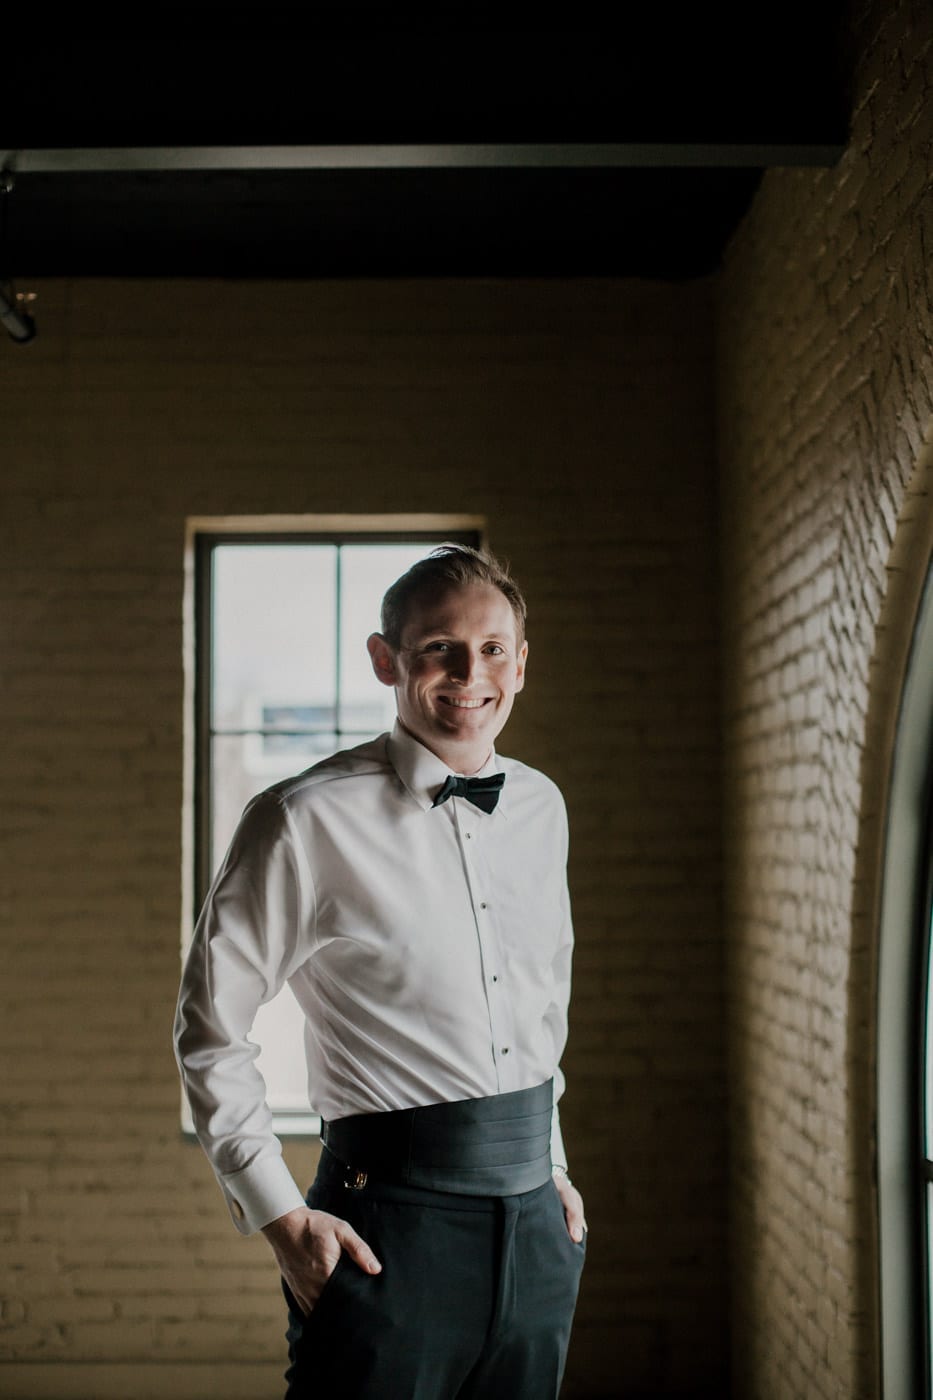 groom smiling with jacket off at black tie winter wedding